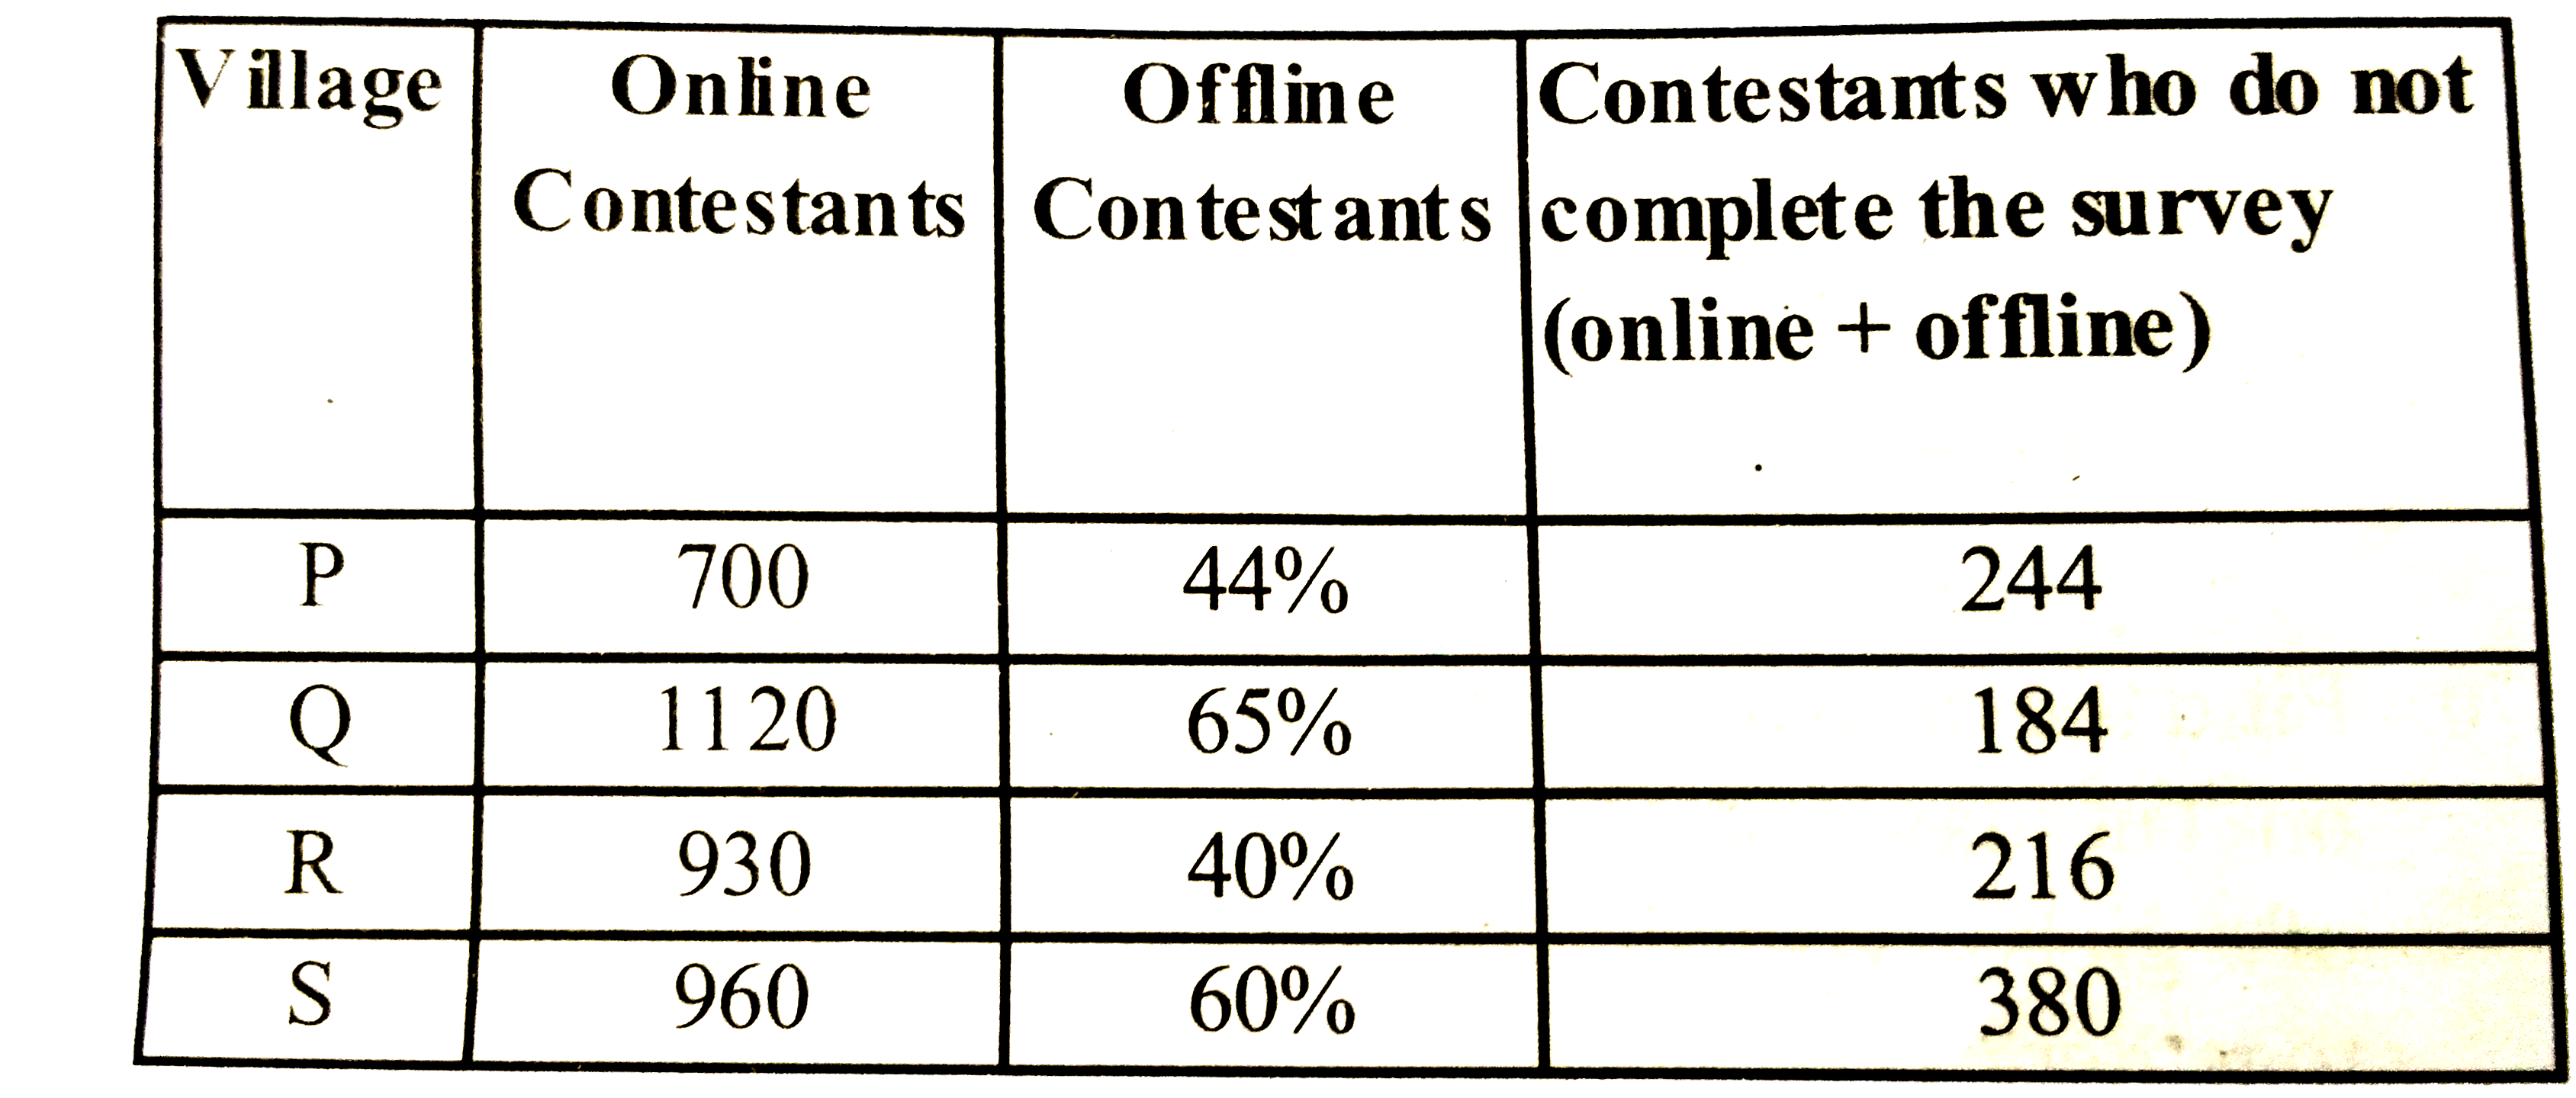 The table shows the online and offline contestants takin part in a survey from four villages and total contestant who hae not completed the survey (online and offline)   Note 1:  Total contestants in a villages= Online onstestants+ Offline contestants   2 : Total contestants in a village = Constestant who complete the survey + contestants who do not complete survery      Find the difference bteween the number of offline contestants of village R and that of village P.